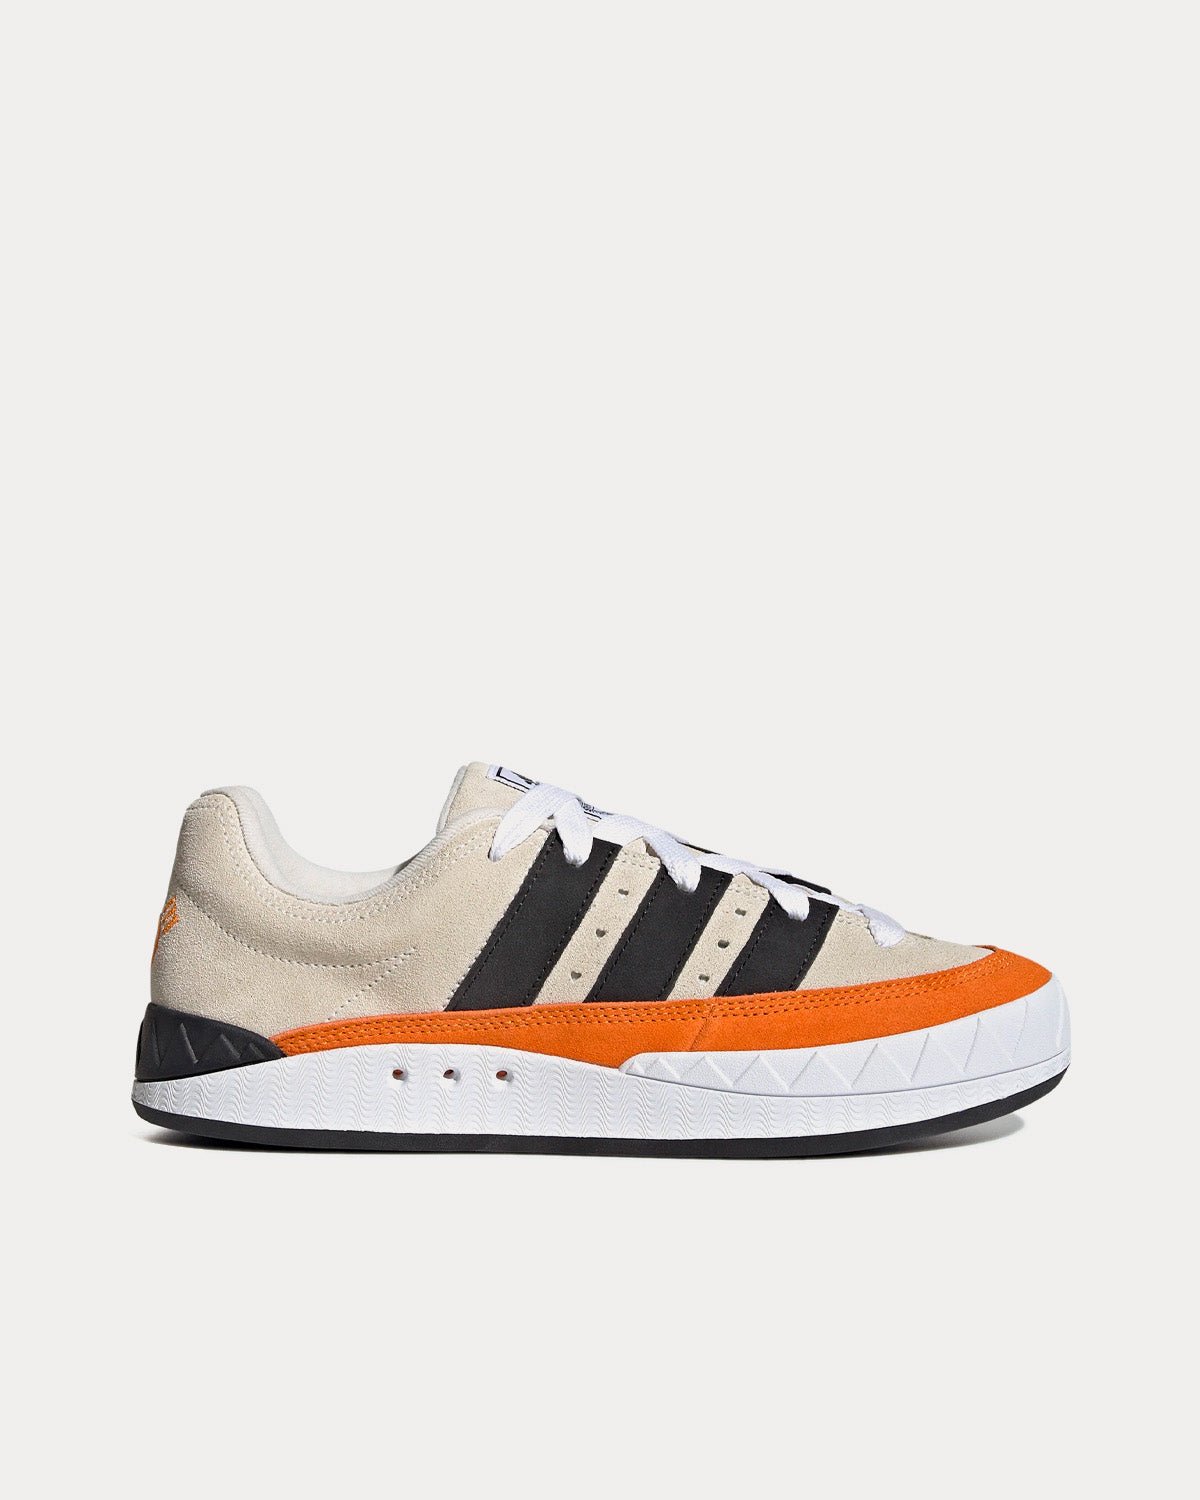 Adidas x Human Made - Adimatic Off White / Core Black / Bright Orange Low Top Sneakers